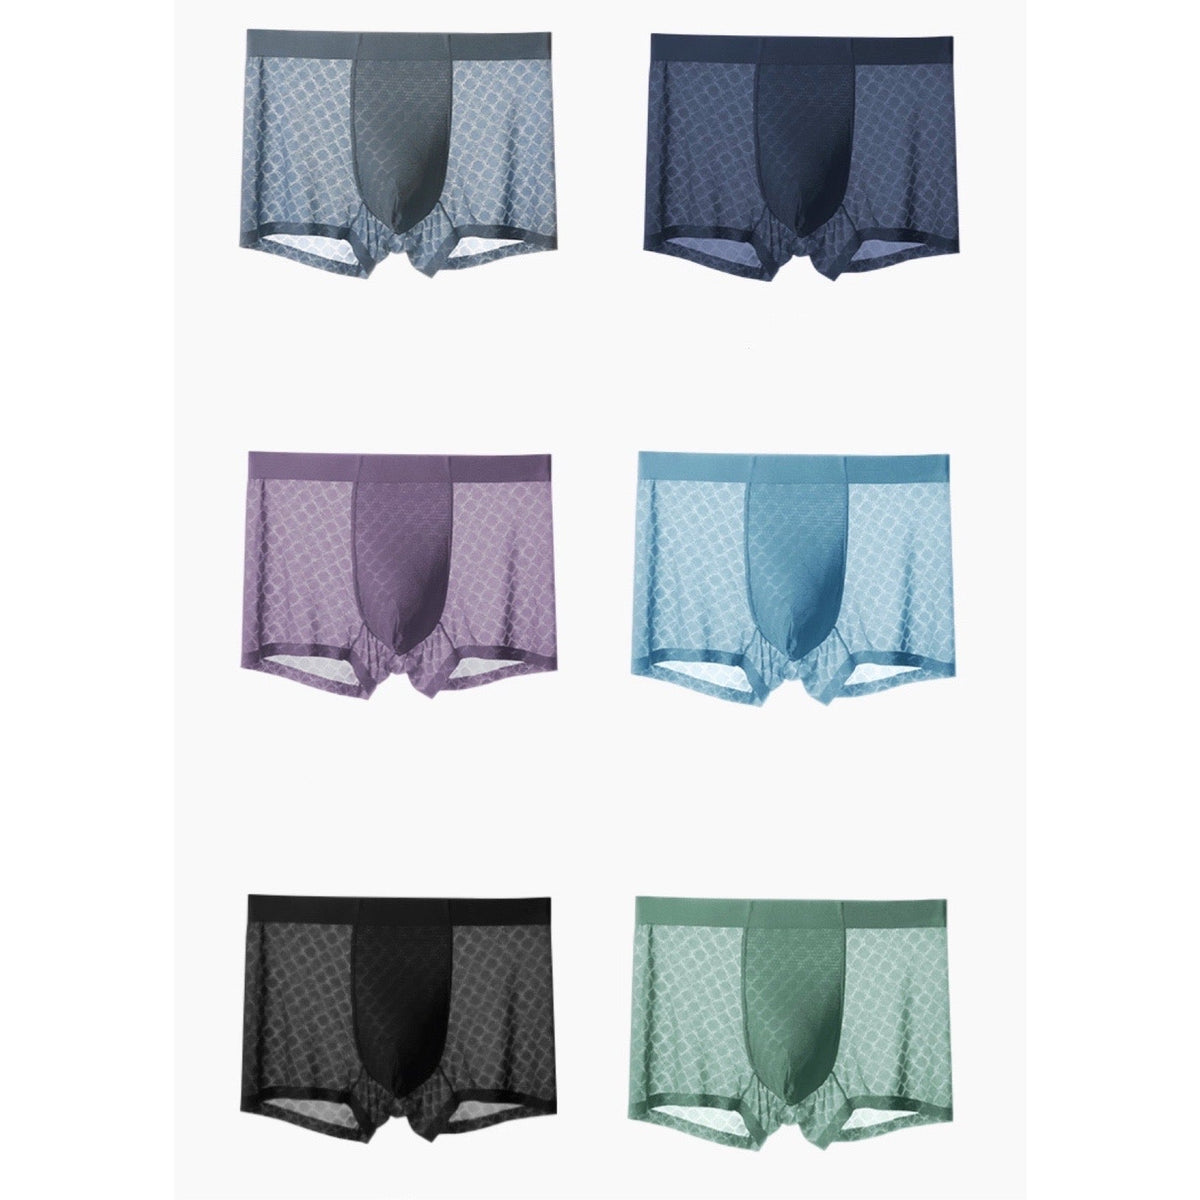 Men's Patterned Ultra Thin Ice Silk Underpants (6-Pack)